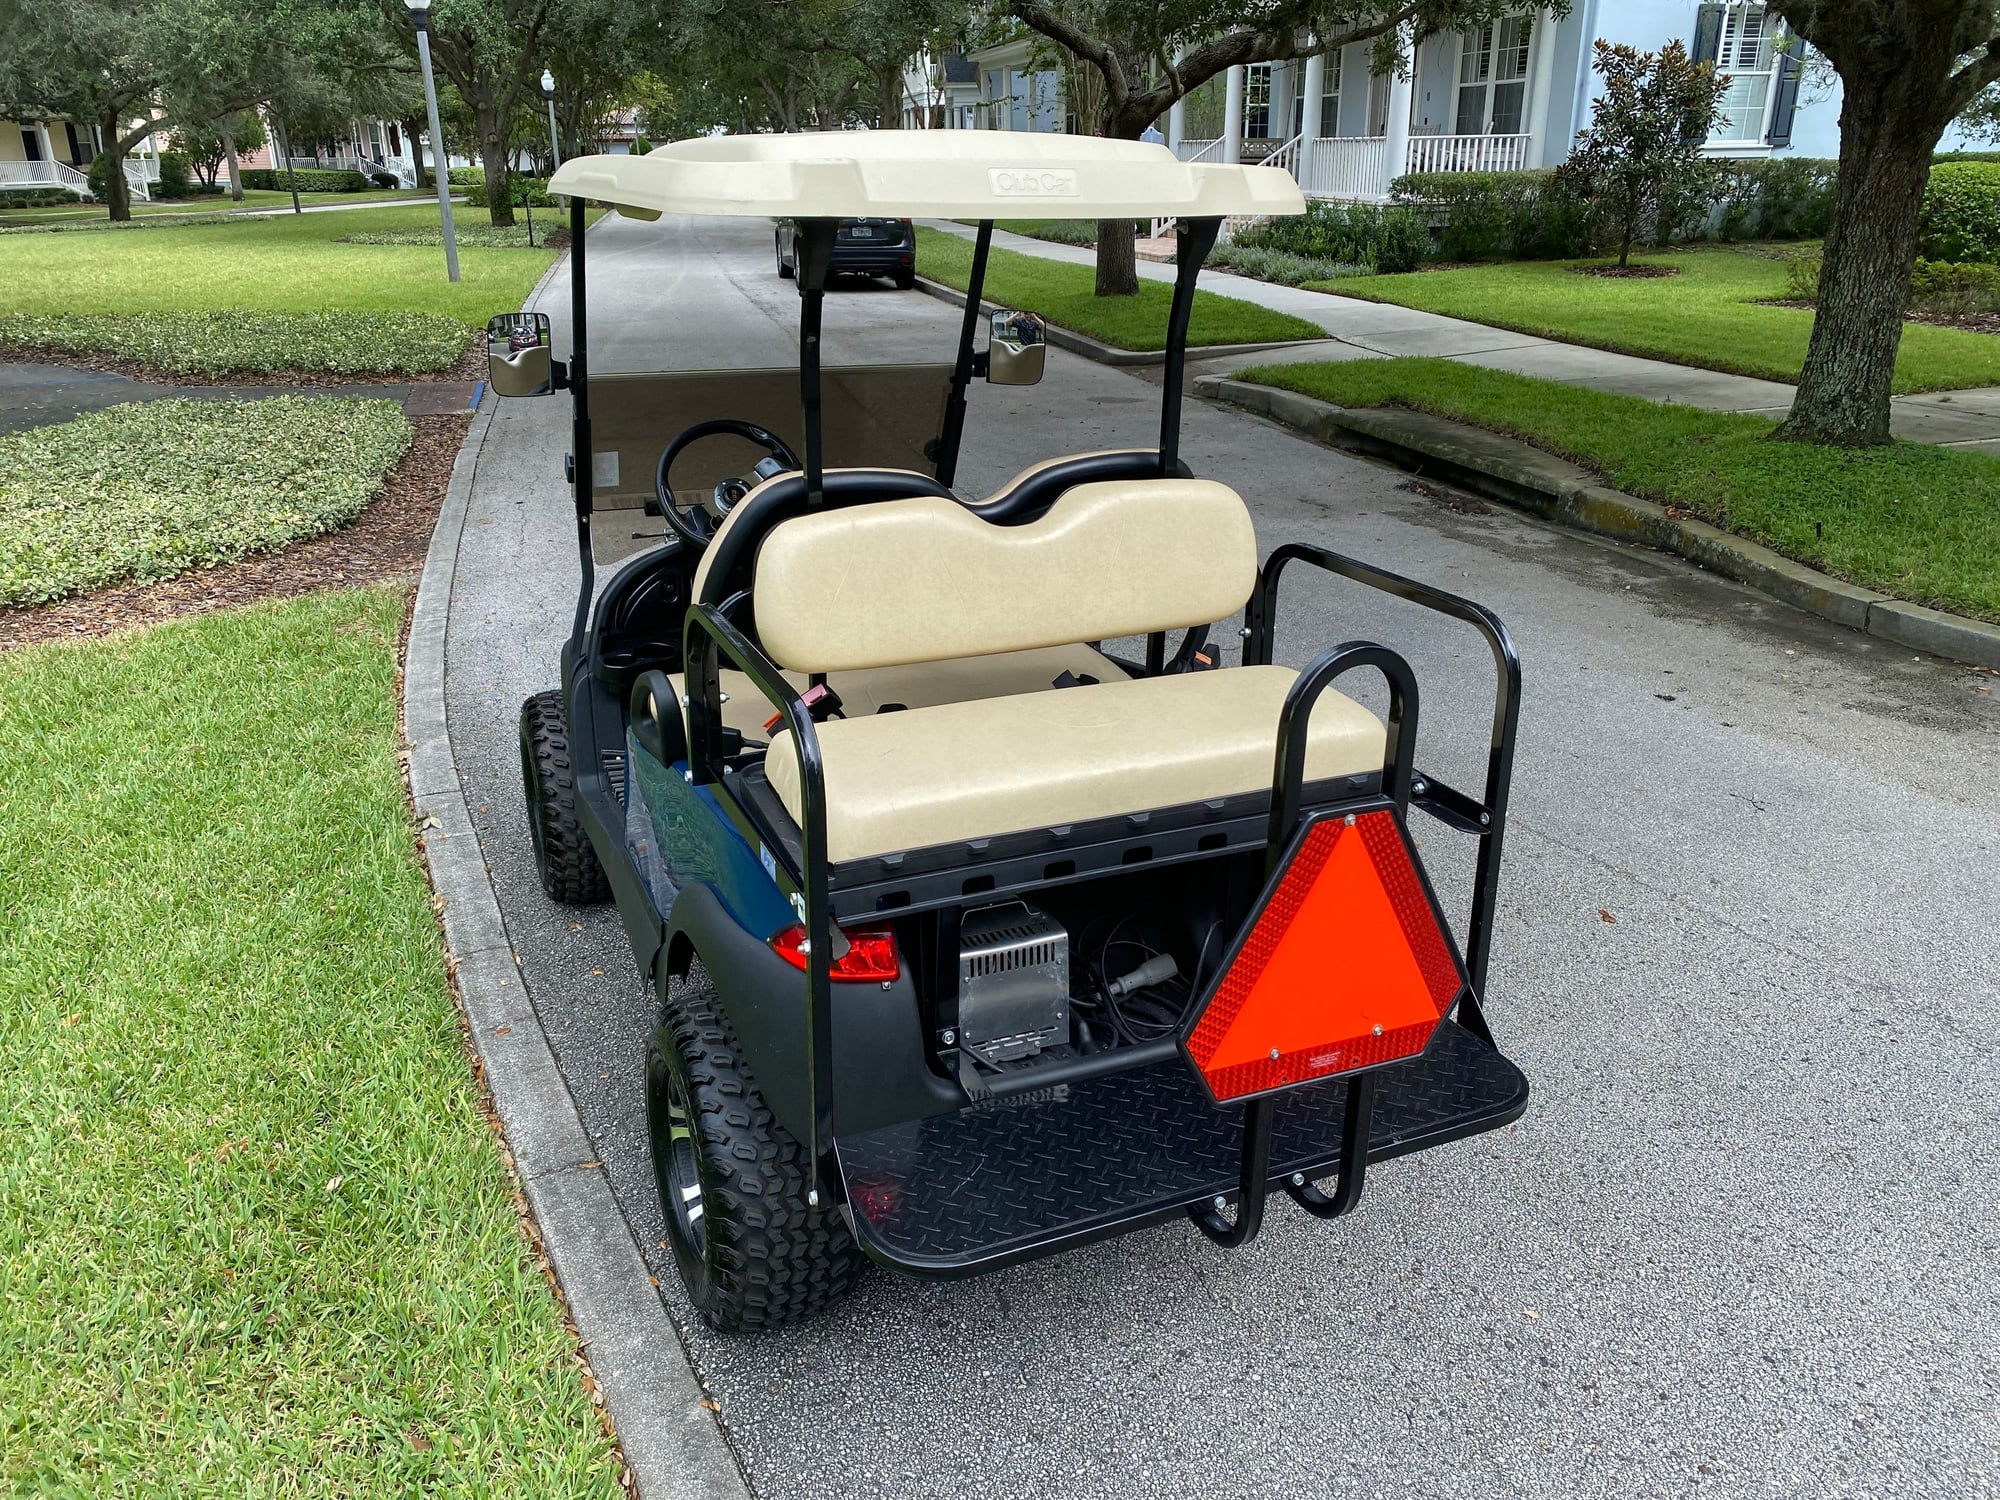 2013 Lifted Club Car - Four Seater - Recent Batteries - $7250 - The Hull  Truth - Boating and Fishing Forum